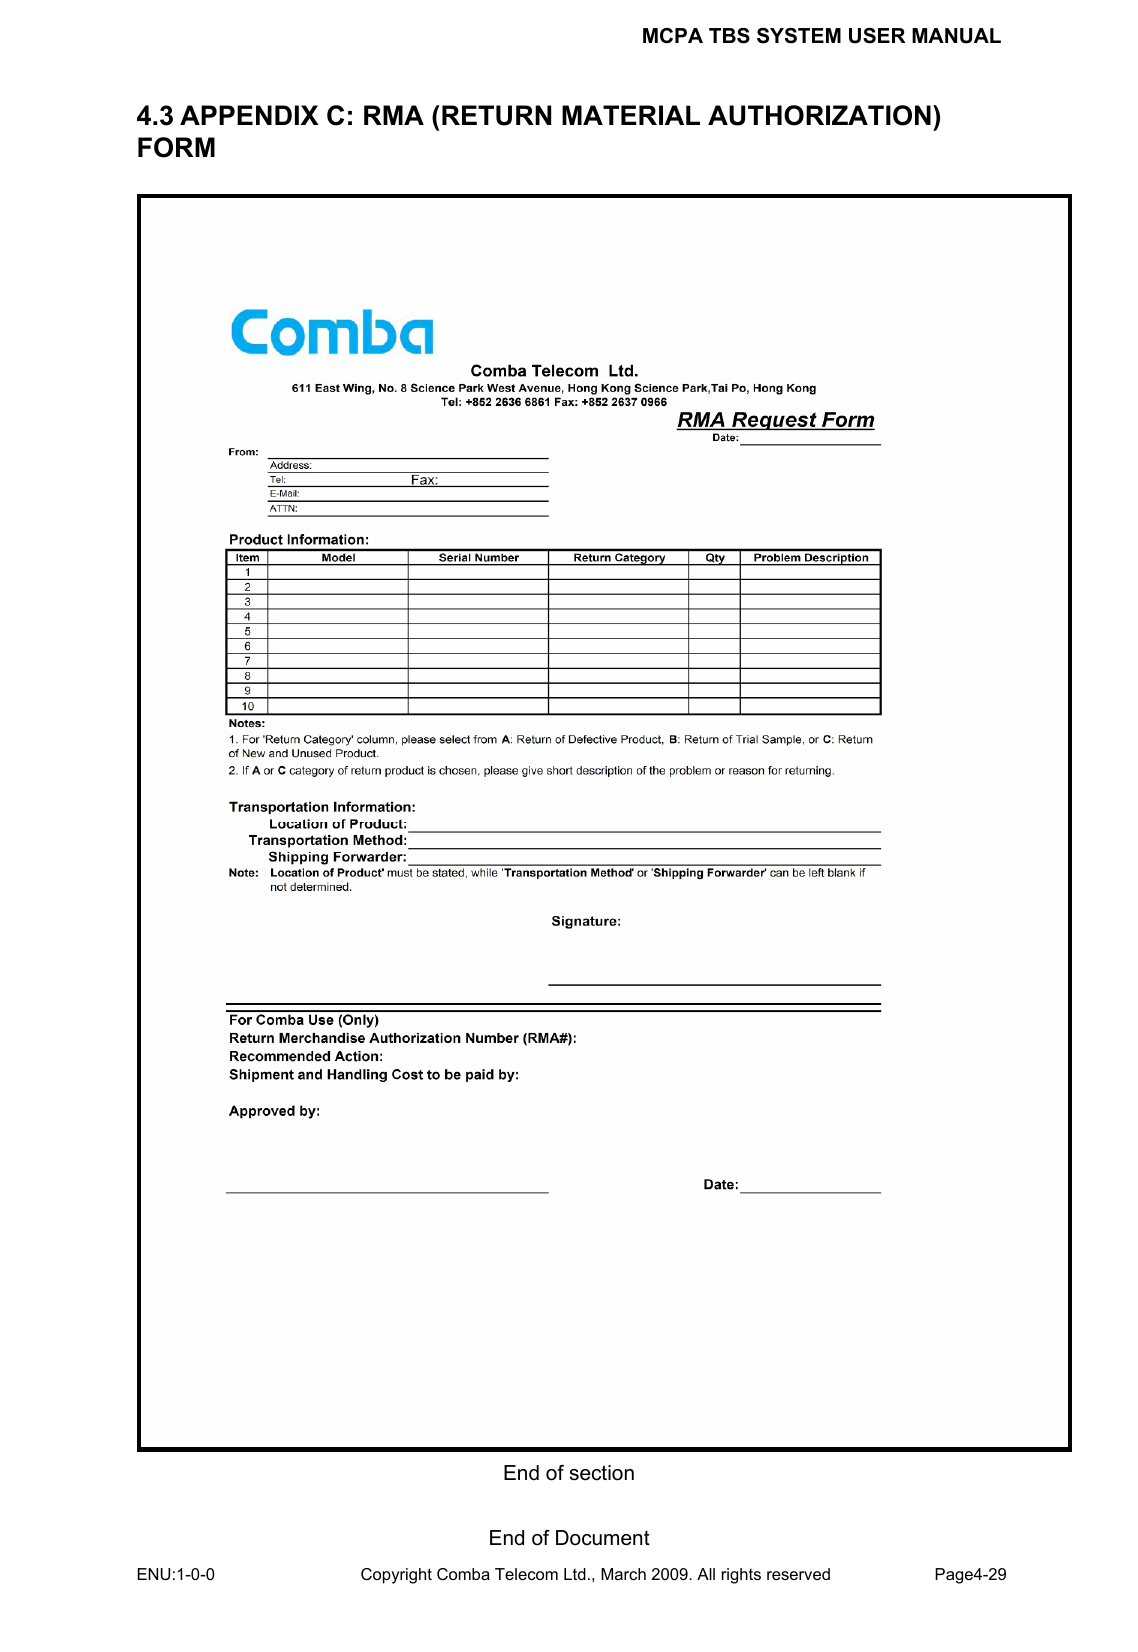 MCPA TBS SYSTEM USER MANUAL ENU:1-0-0 Copyright Comba Telecom Ltd., March 2009. All rights reserved  Page4-29    4.3 APPENDIX C: RMA (RETURN MATERIAL AUTHORIZATION) FORM  End of section  End of Document 